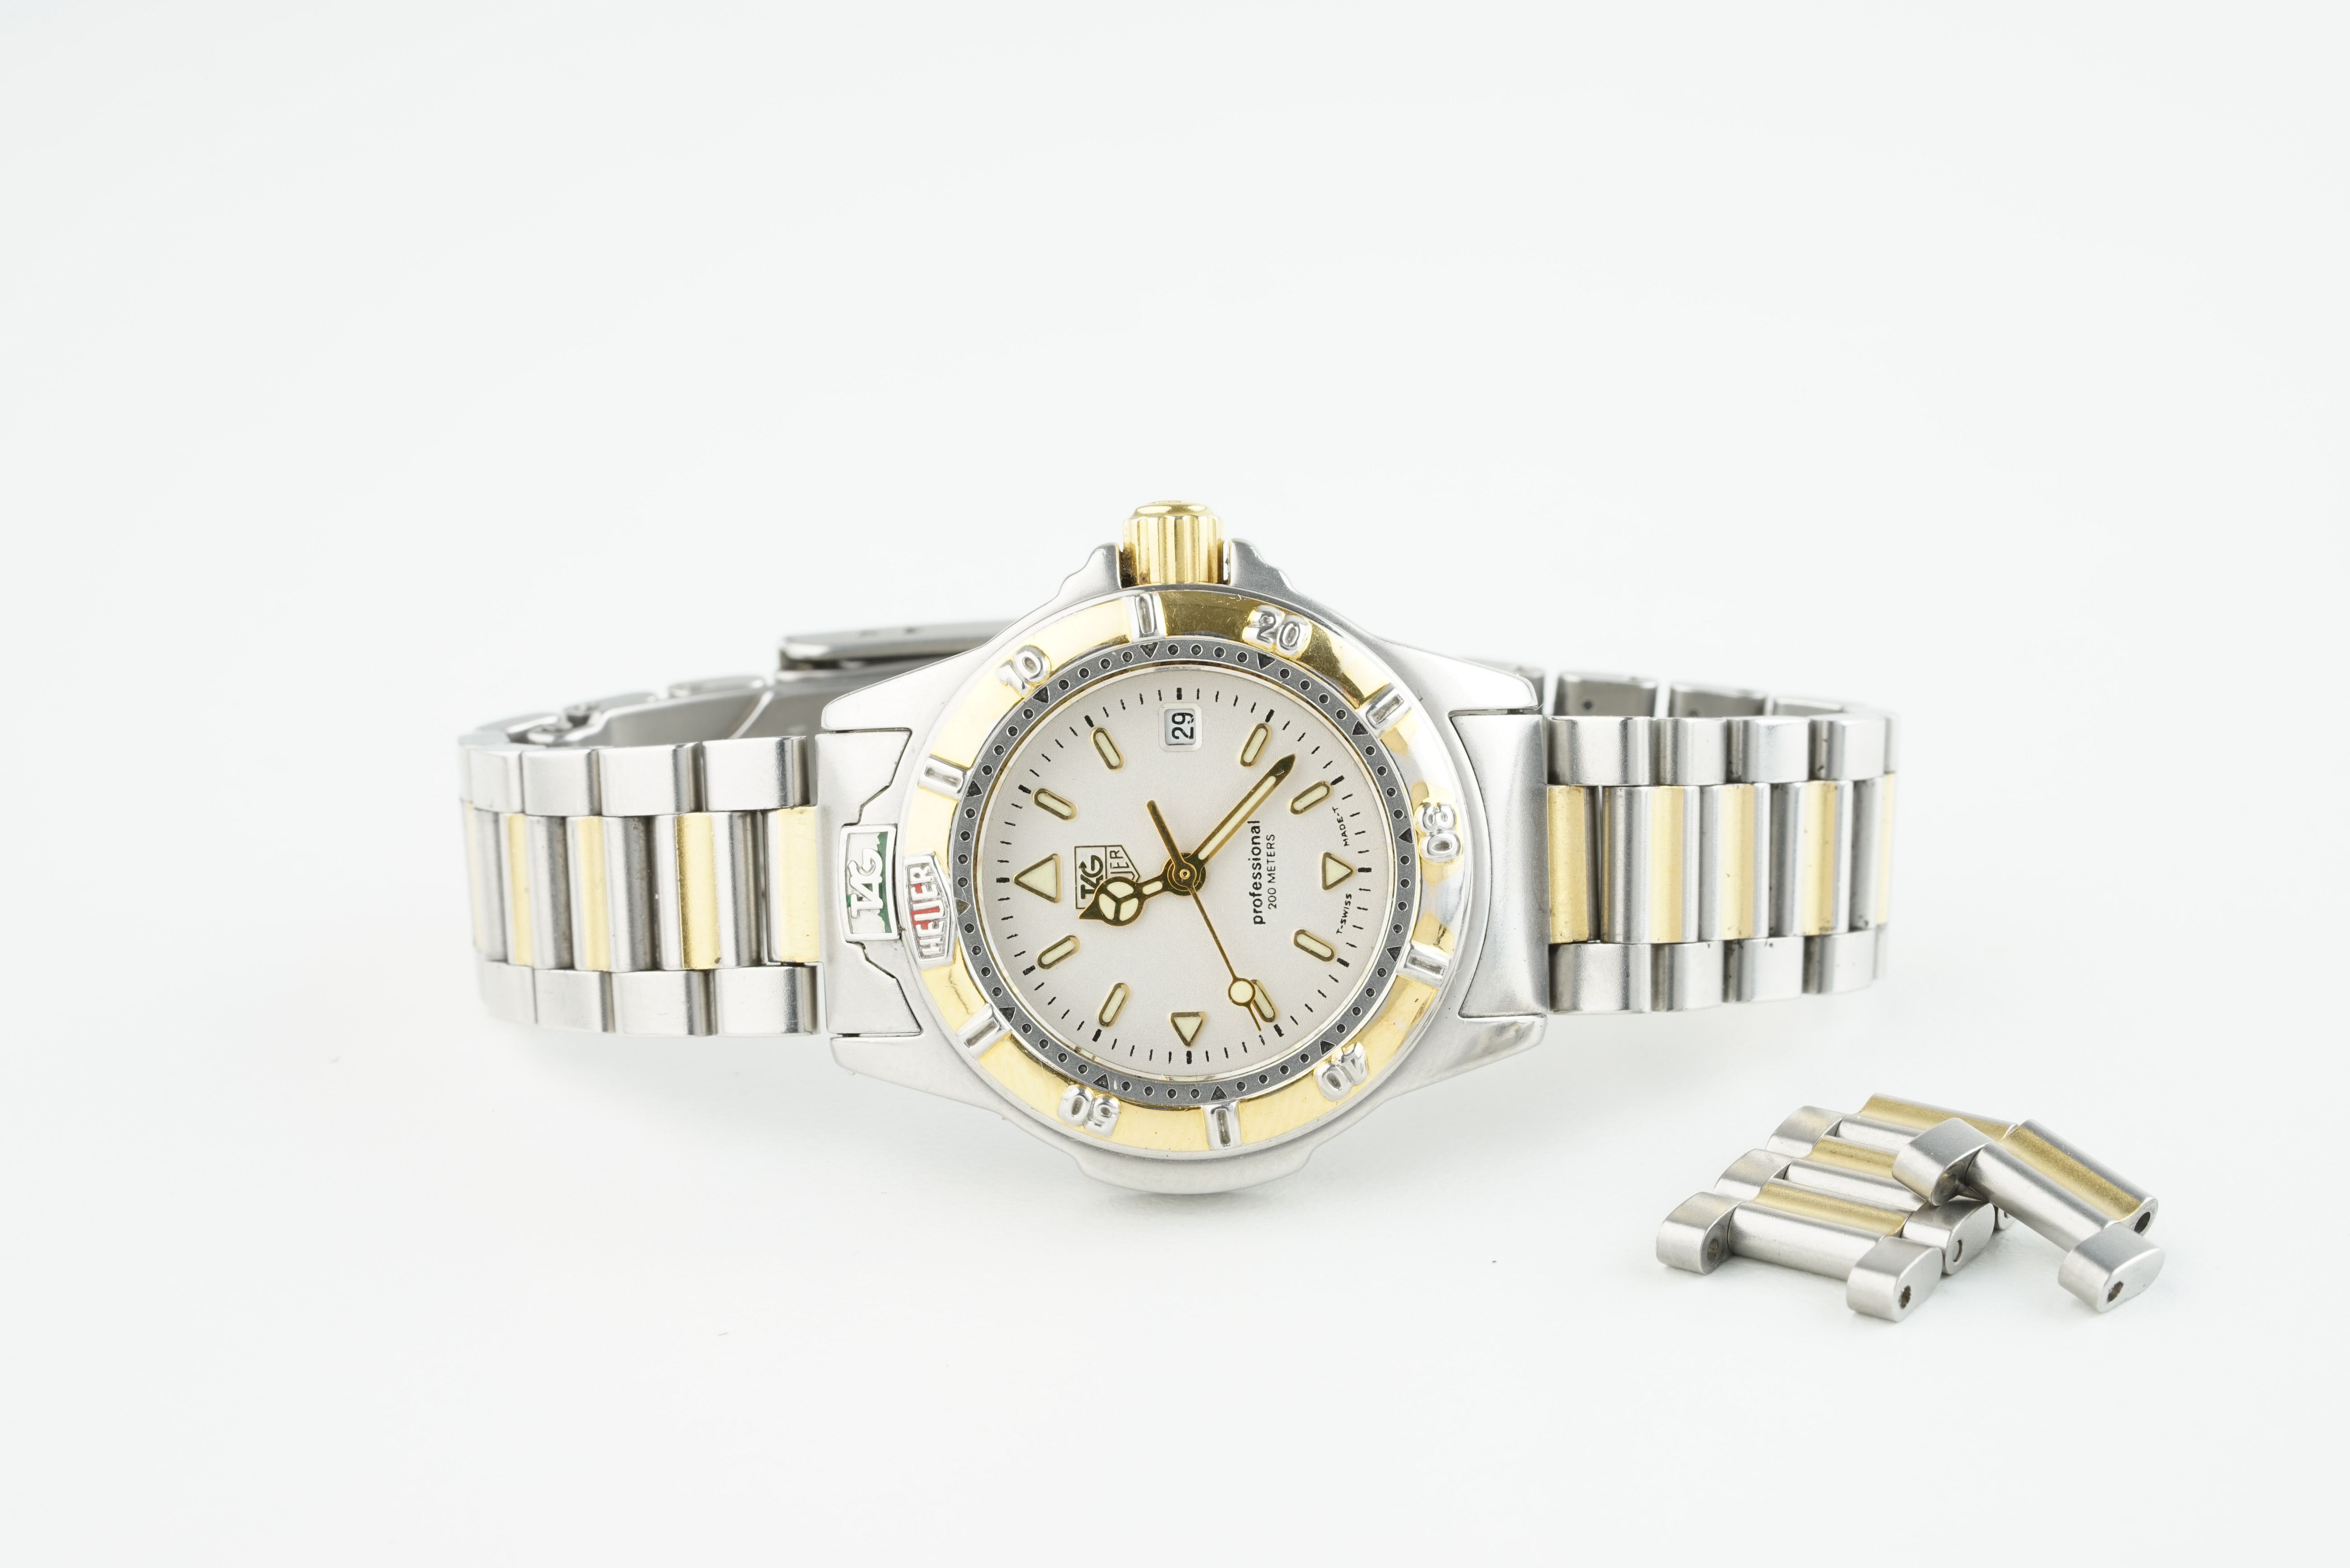 LADIES TAG HEUER PROFESSIONAL WRISTWATCH, circular white dial with applied hour markers and hands,